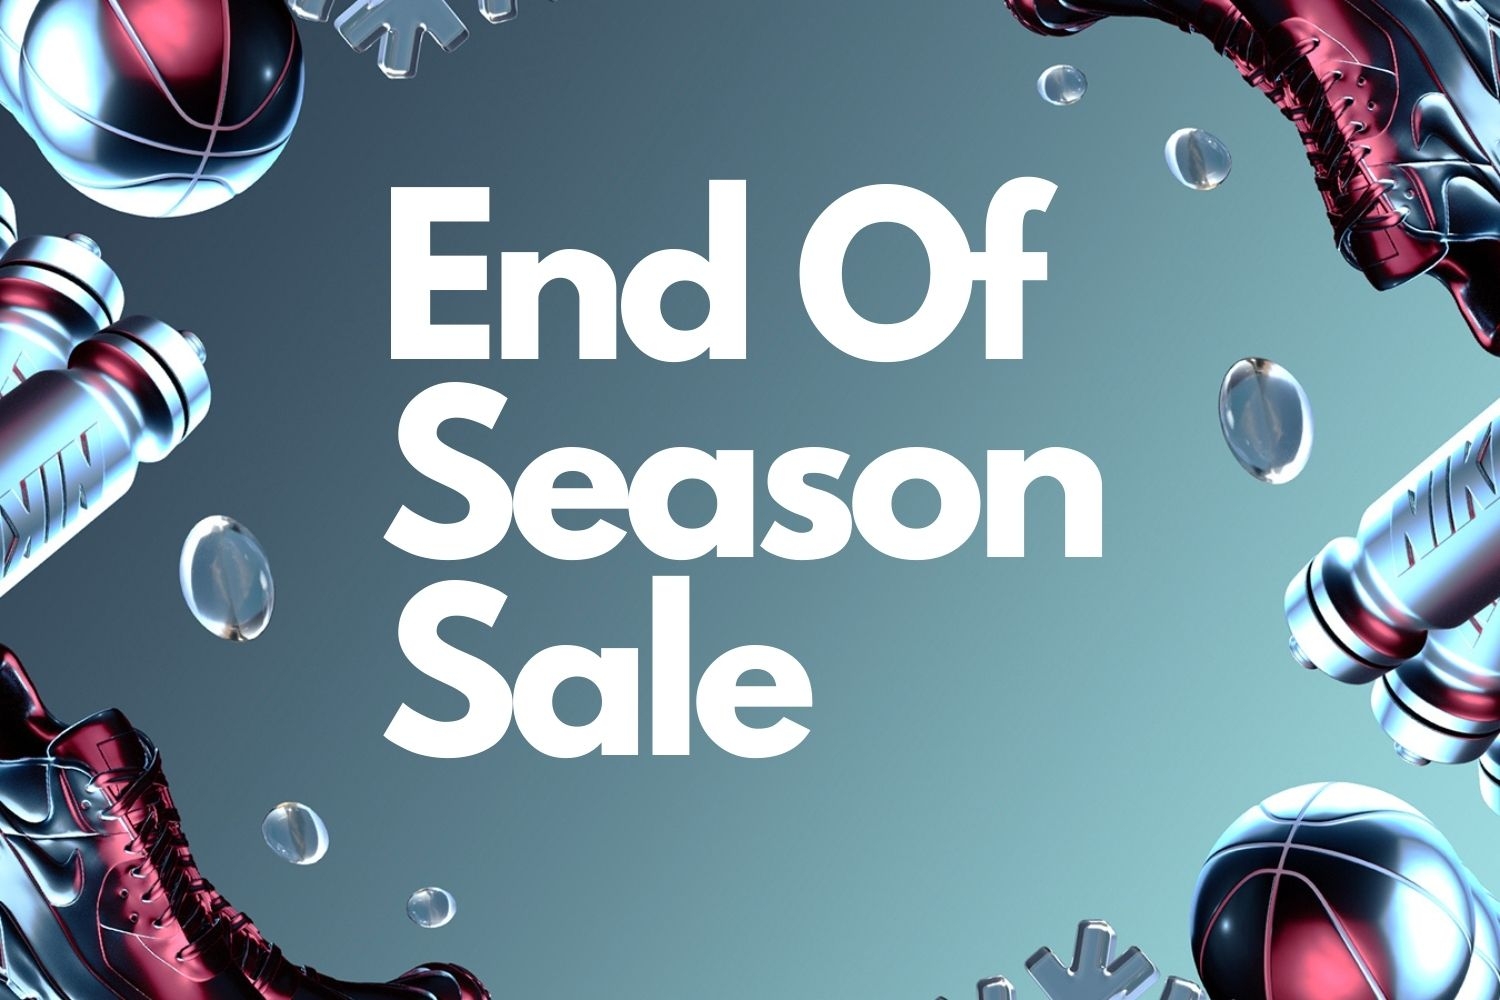 Get up to 50% off during Nike's End of Season sale